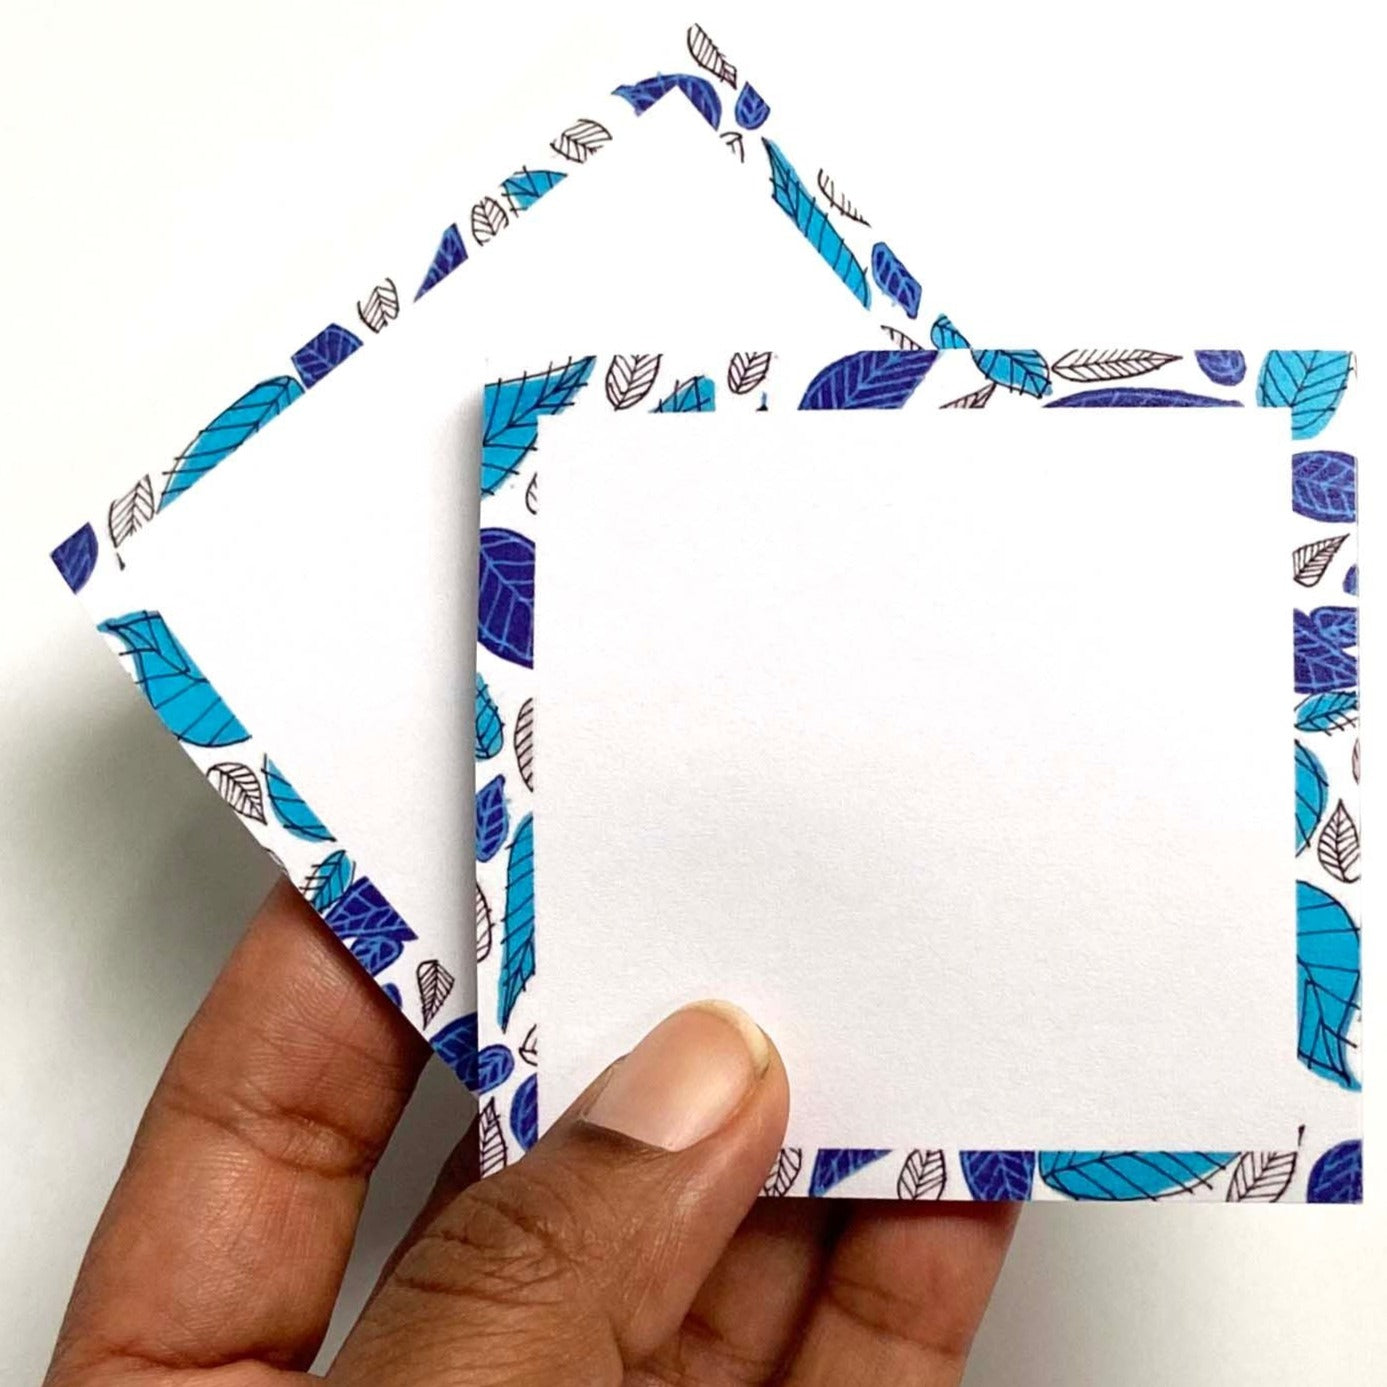 Blue sticky notes by Laksh Sarkar Creations